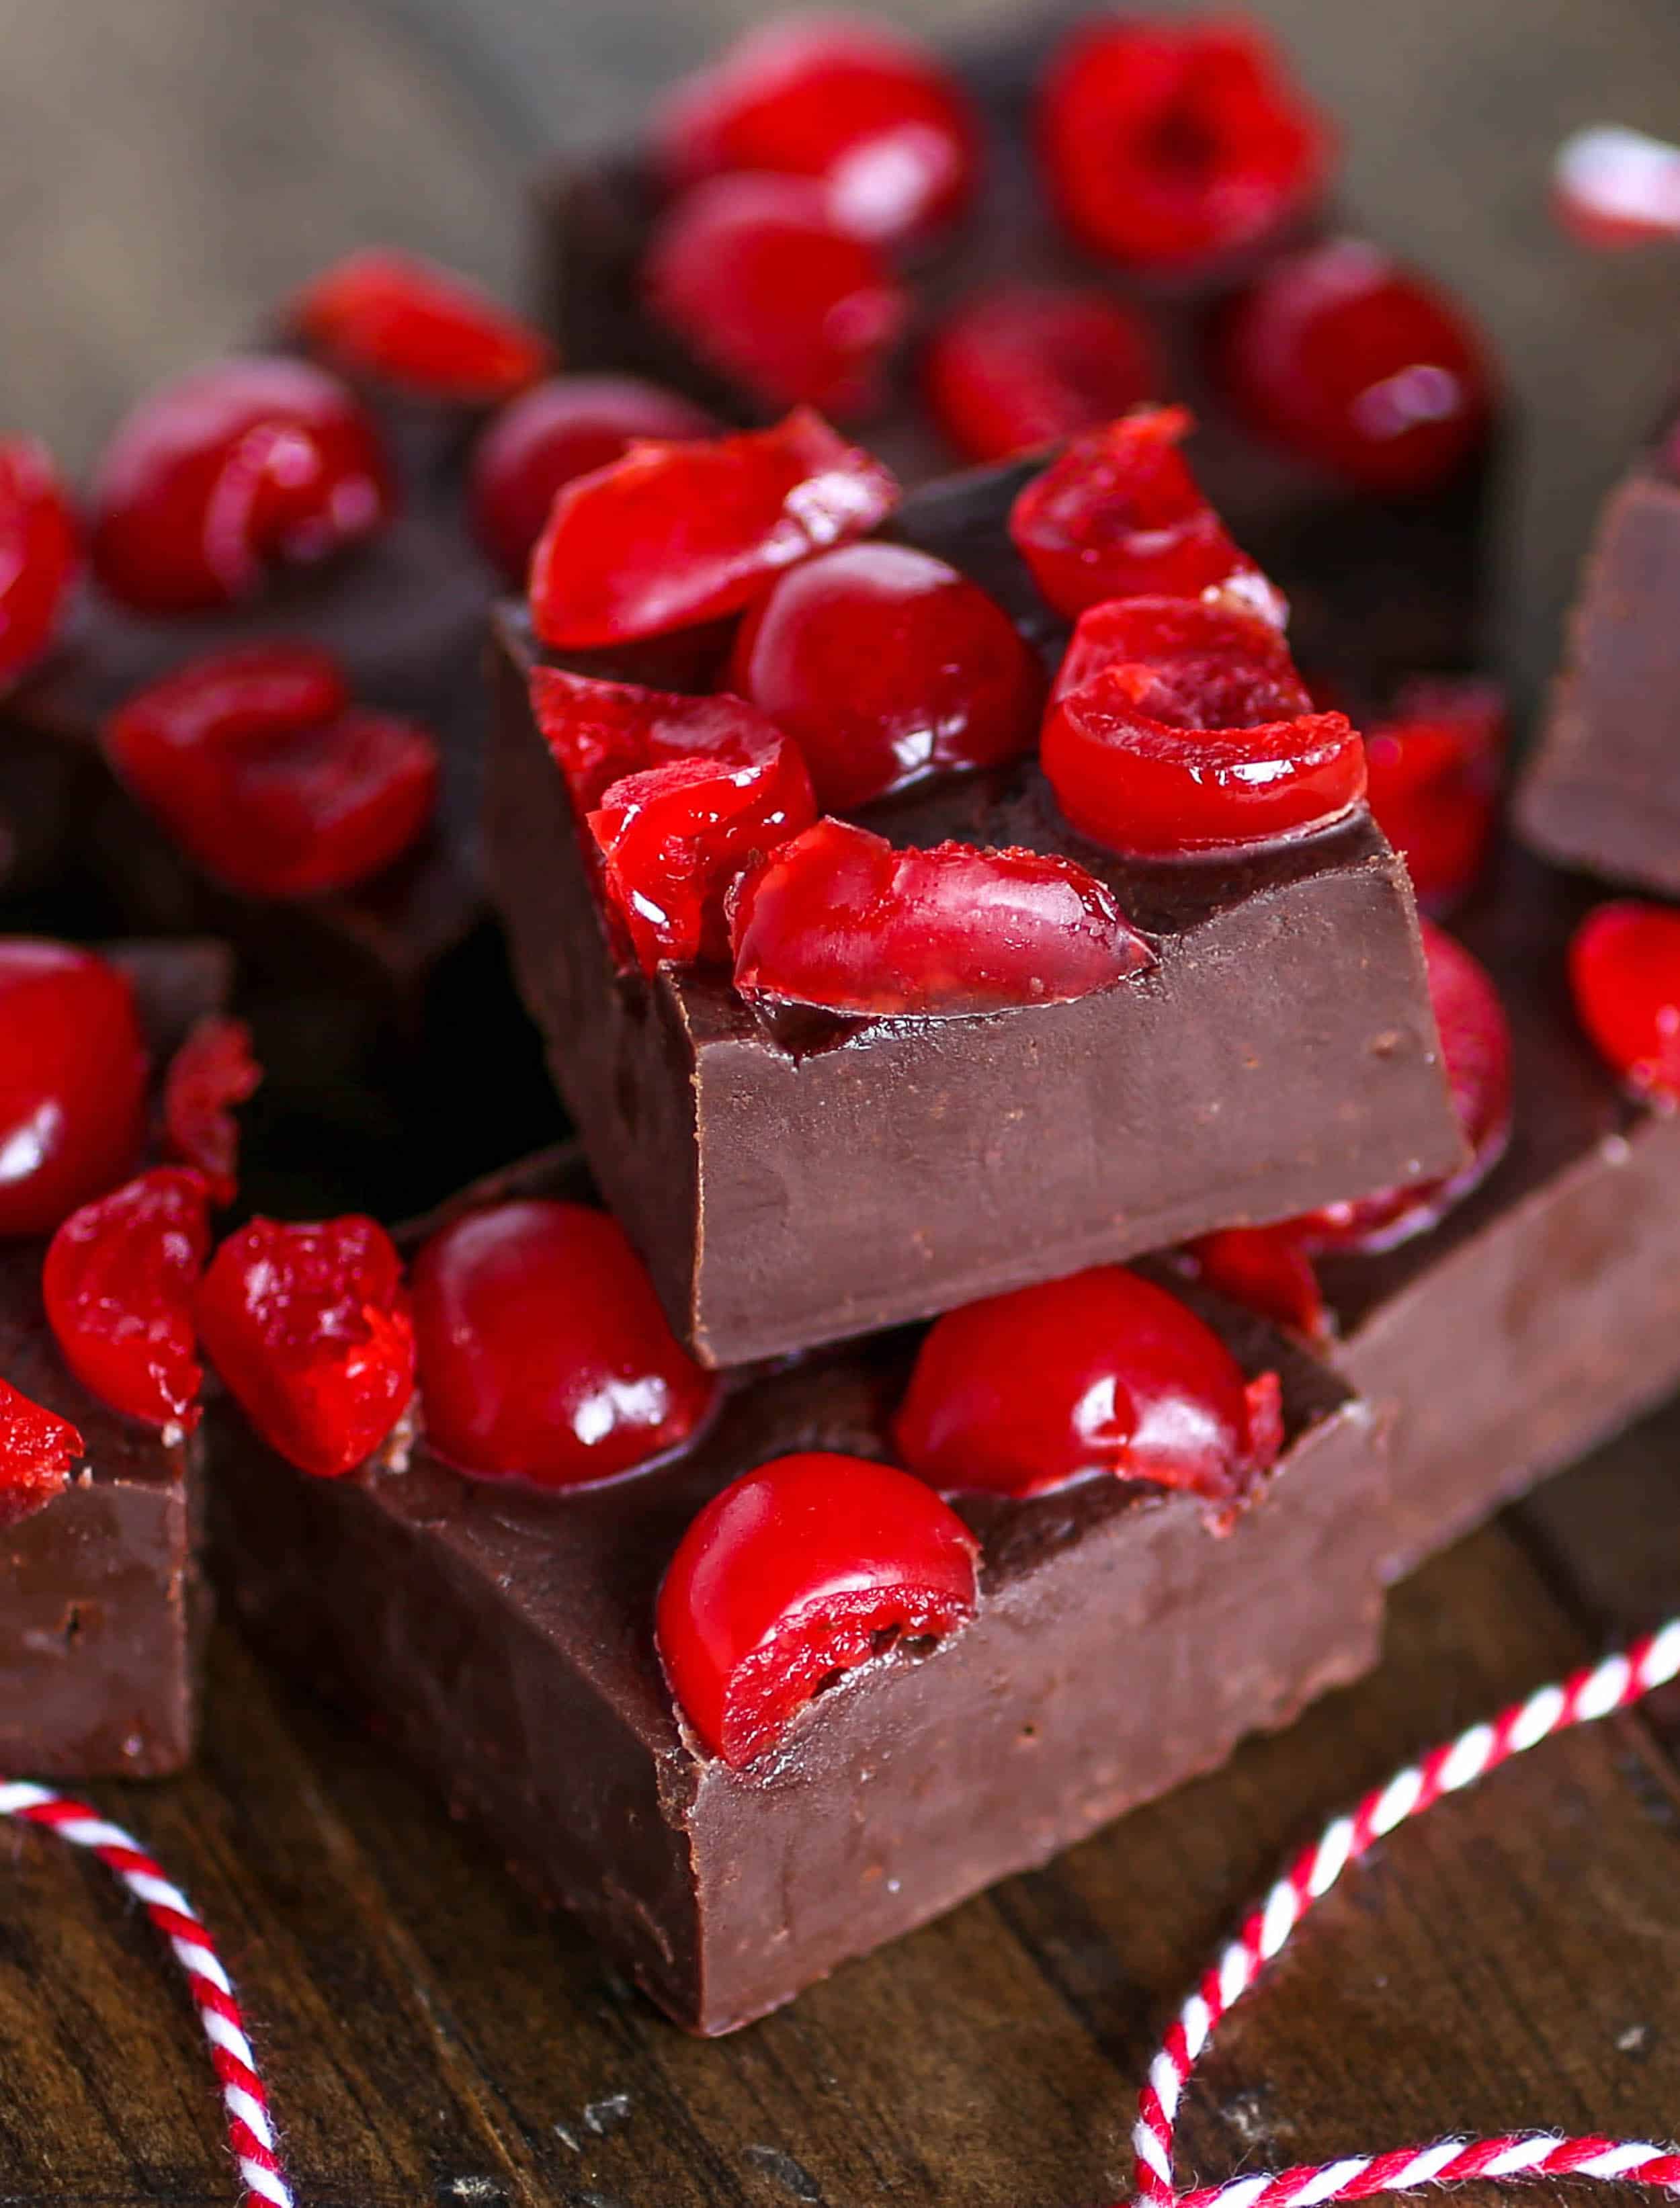 Chocolate Cherry Fudge - No need to head to the candy store with this creamy chocolate fudge! Topped with sweet and juicy cherries, you have one amazing treat!